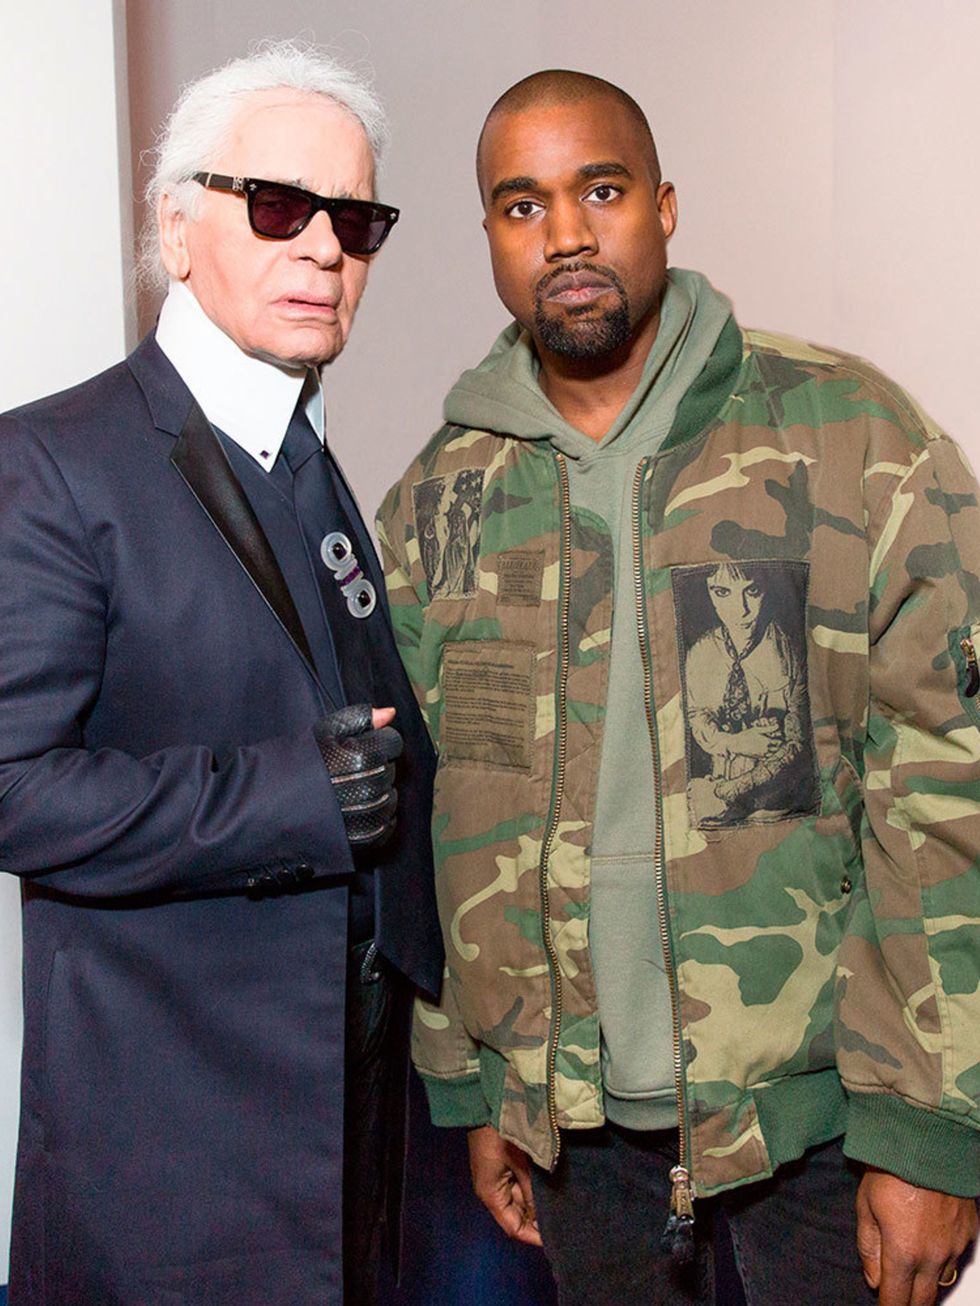 <p>Kayne West and Karl Lagerfeld.</p>

<p>Kayne continues to build his fashion kingdom by bonding with the Kaiser. We'll know this is a forever friendship when Kim starts wearing 100% Chanel. </p>